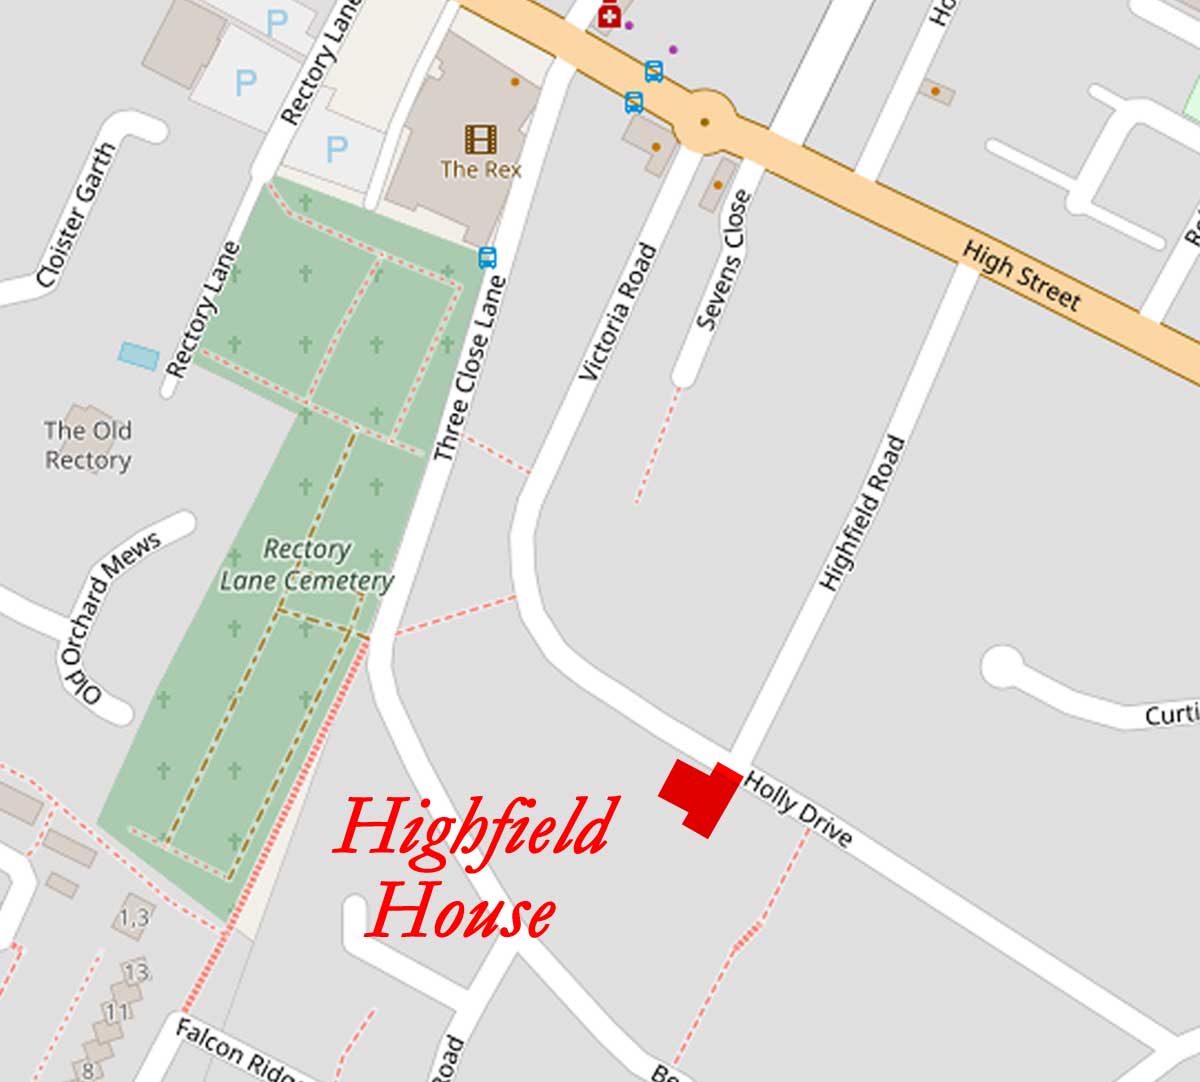 location of Highfield House on a modern map